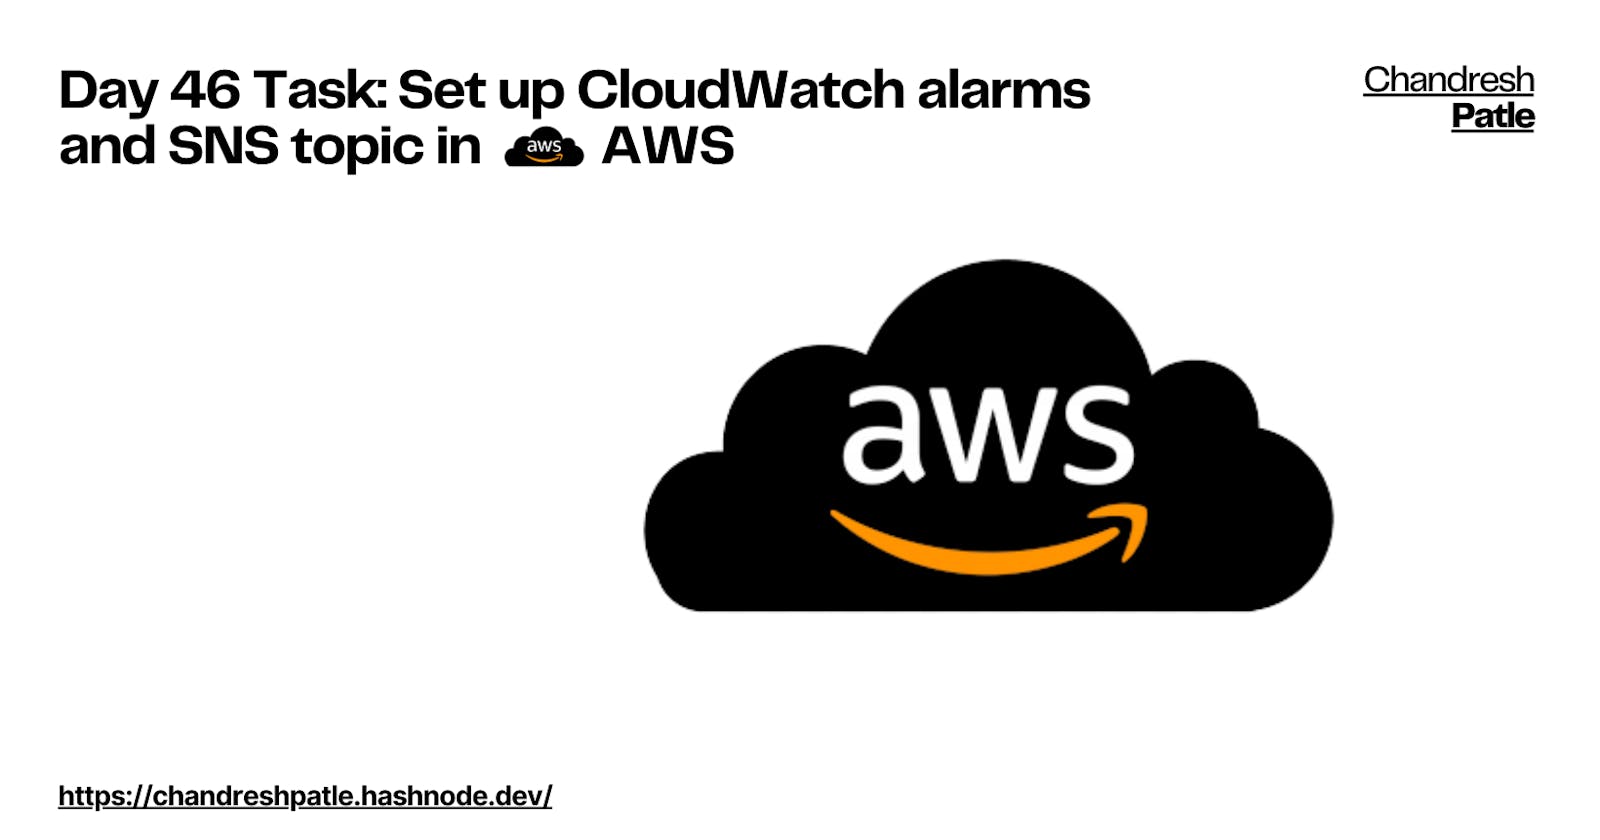 Day 46 Task: Set up CloudWatch alarms and SNS topic in AWS